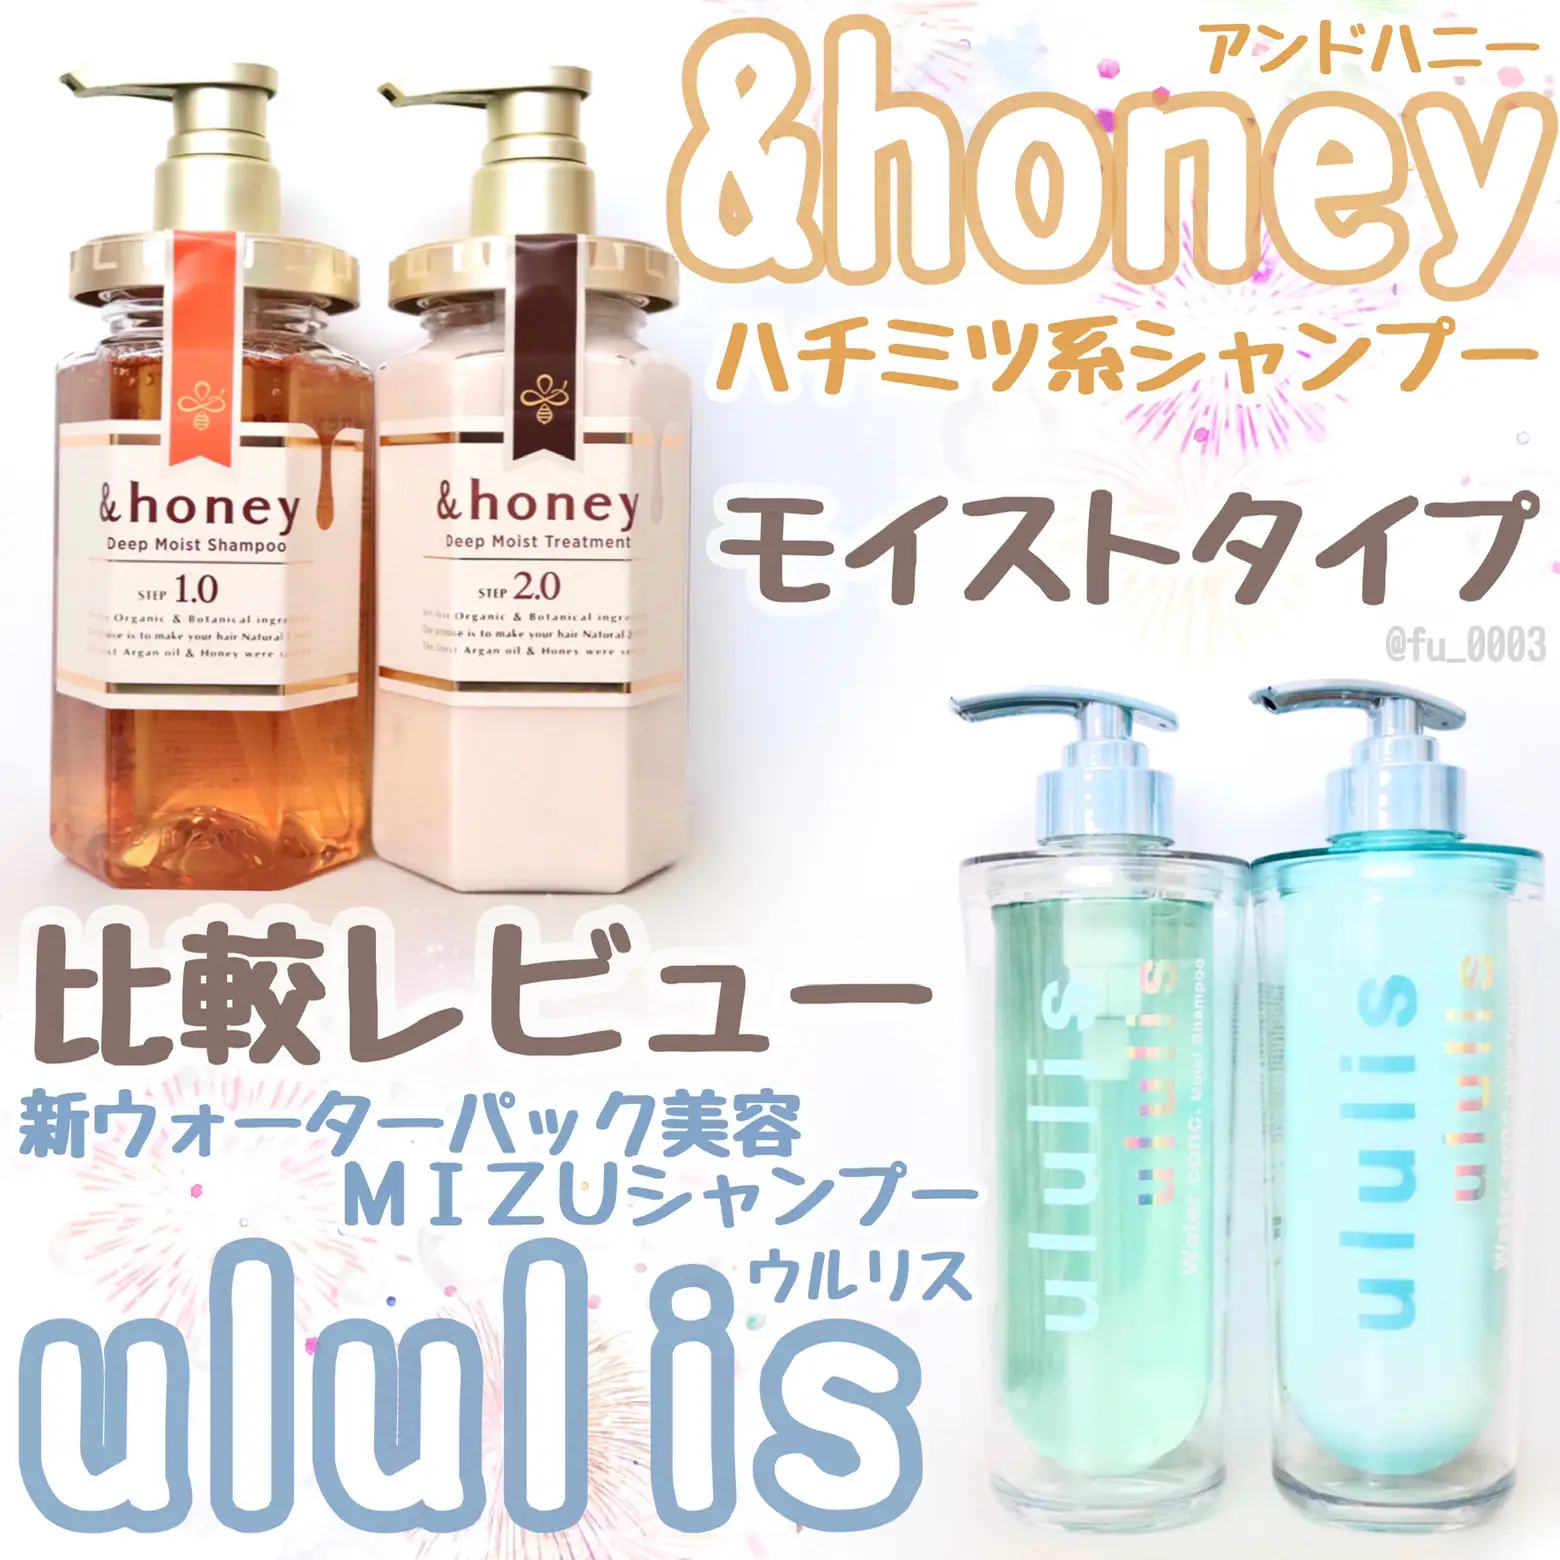  honey ・ ululis 】 Shampoo & Treatment Comparison Review, Gallery posted  by ふうか